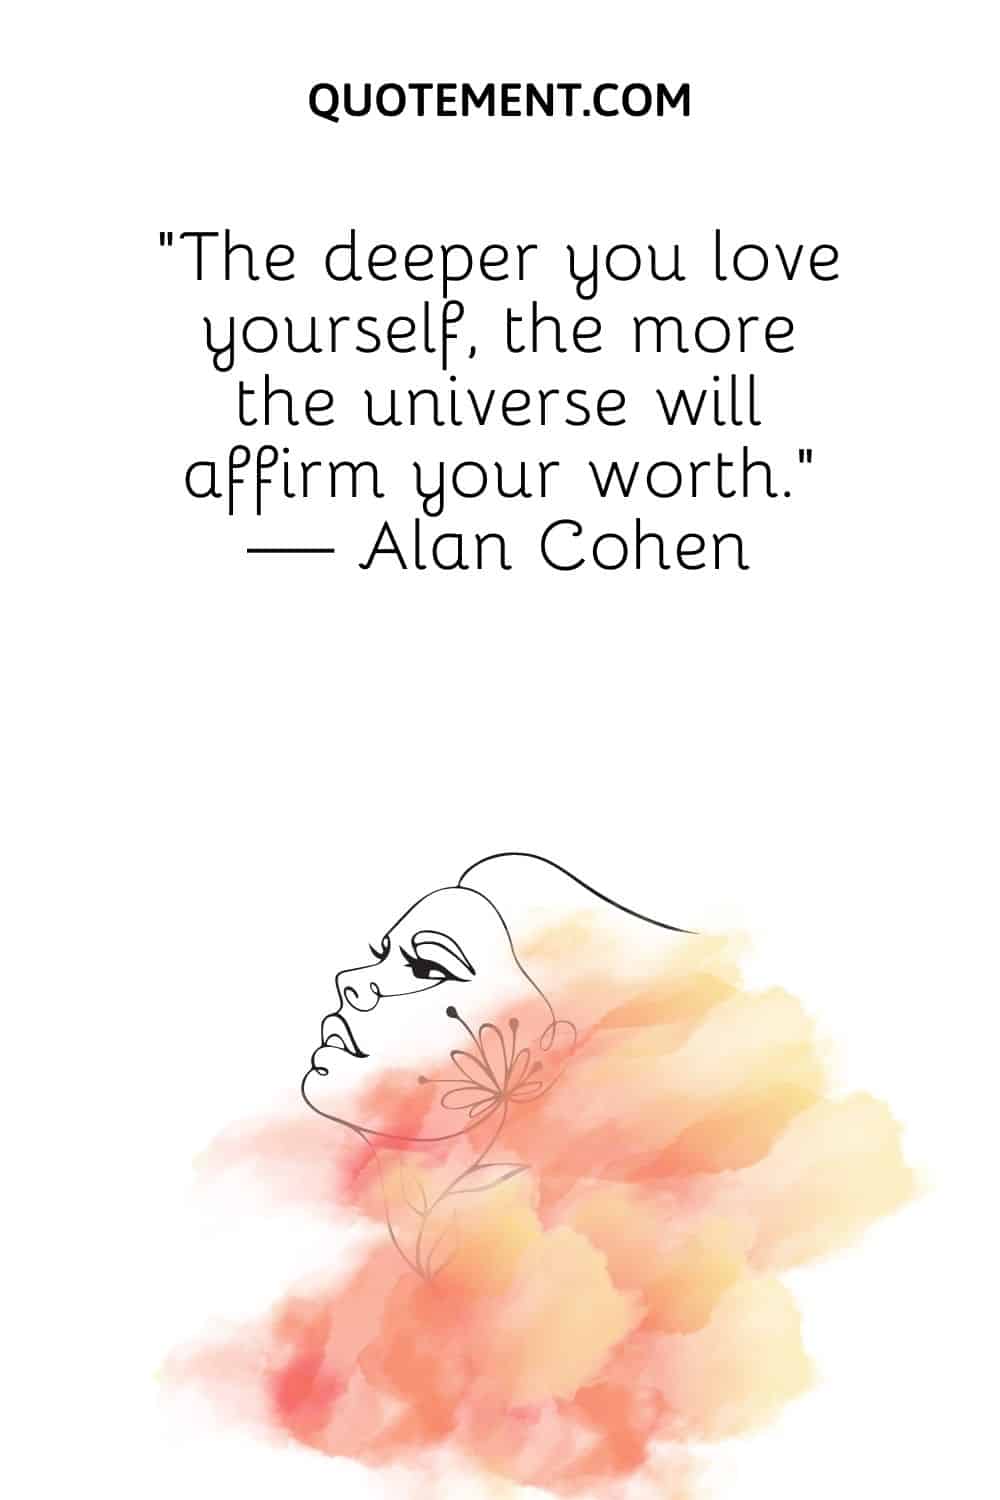 The deeper you love yourself, the more the universe will affirm your worth